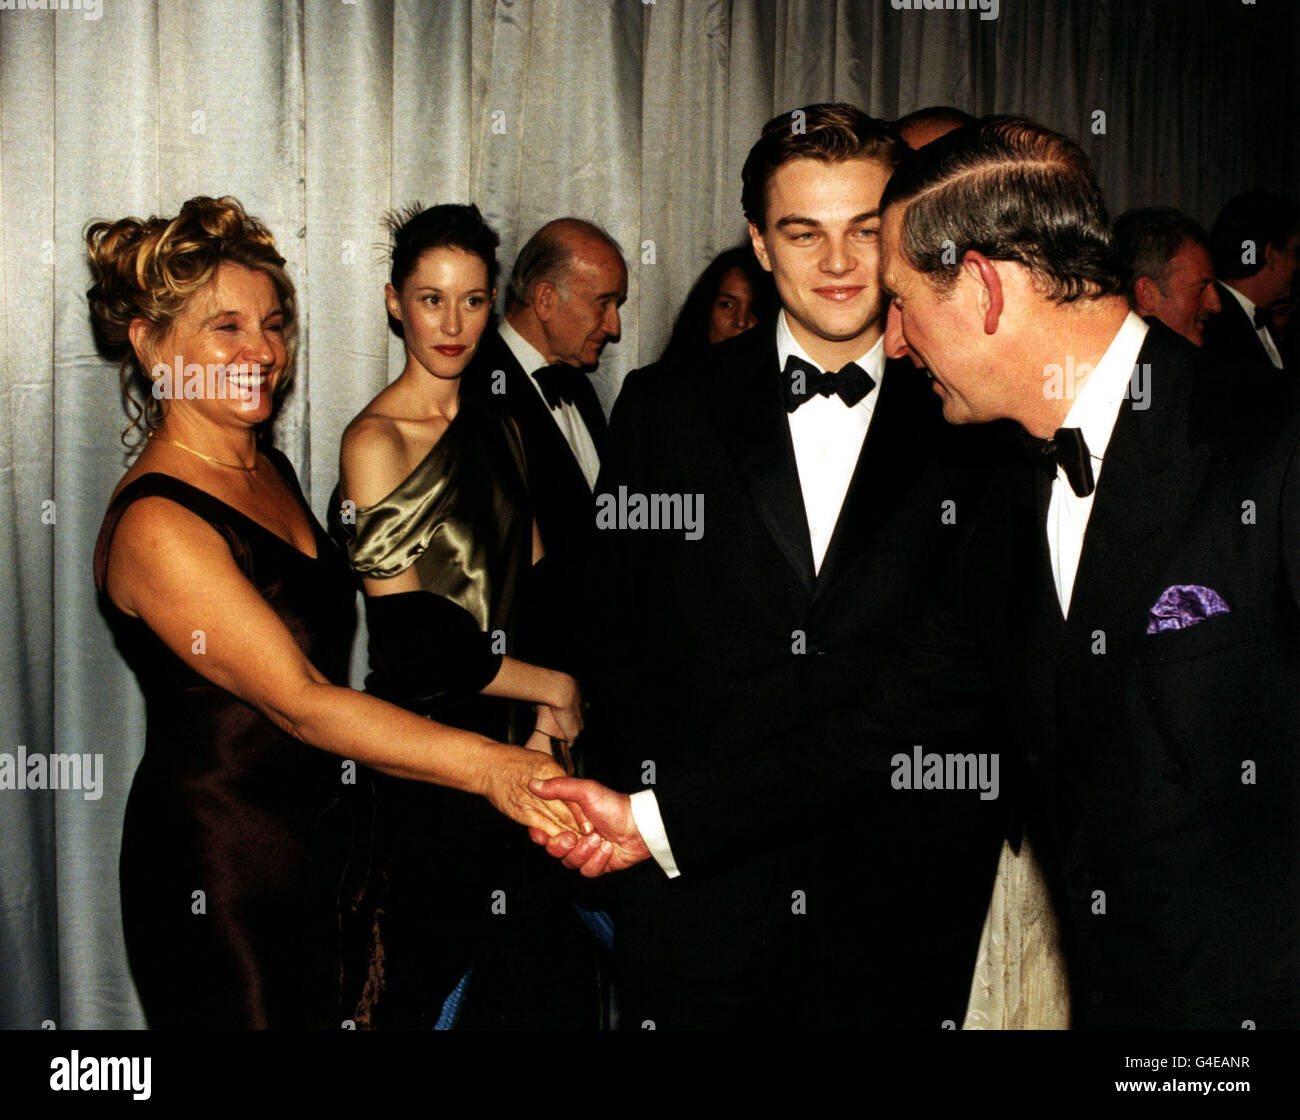 PRINCE CHARLES MEETS LEONARDO DICAPRIO AND HIS MOTHER IRMELIN INDENBIRKEN AT THE ROYAL MOVIE PREMIERE OF 'TITANIC' AT THE ODEON IN LEICESTER SQUARE, LONDON. Stock Photo